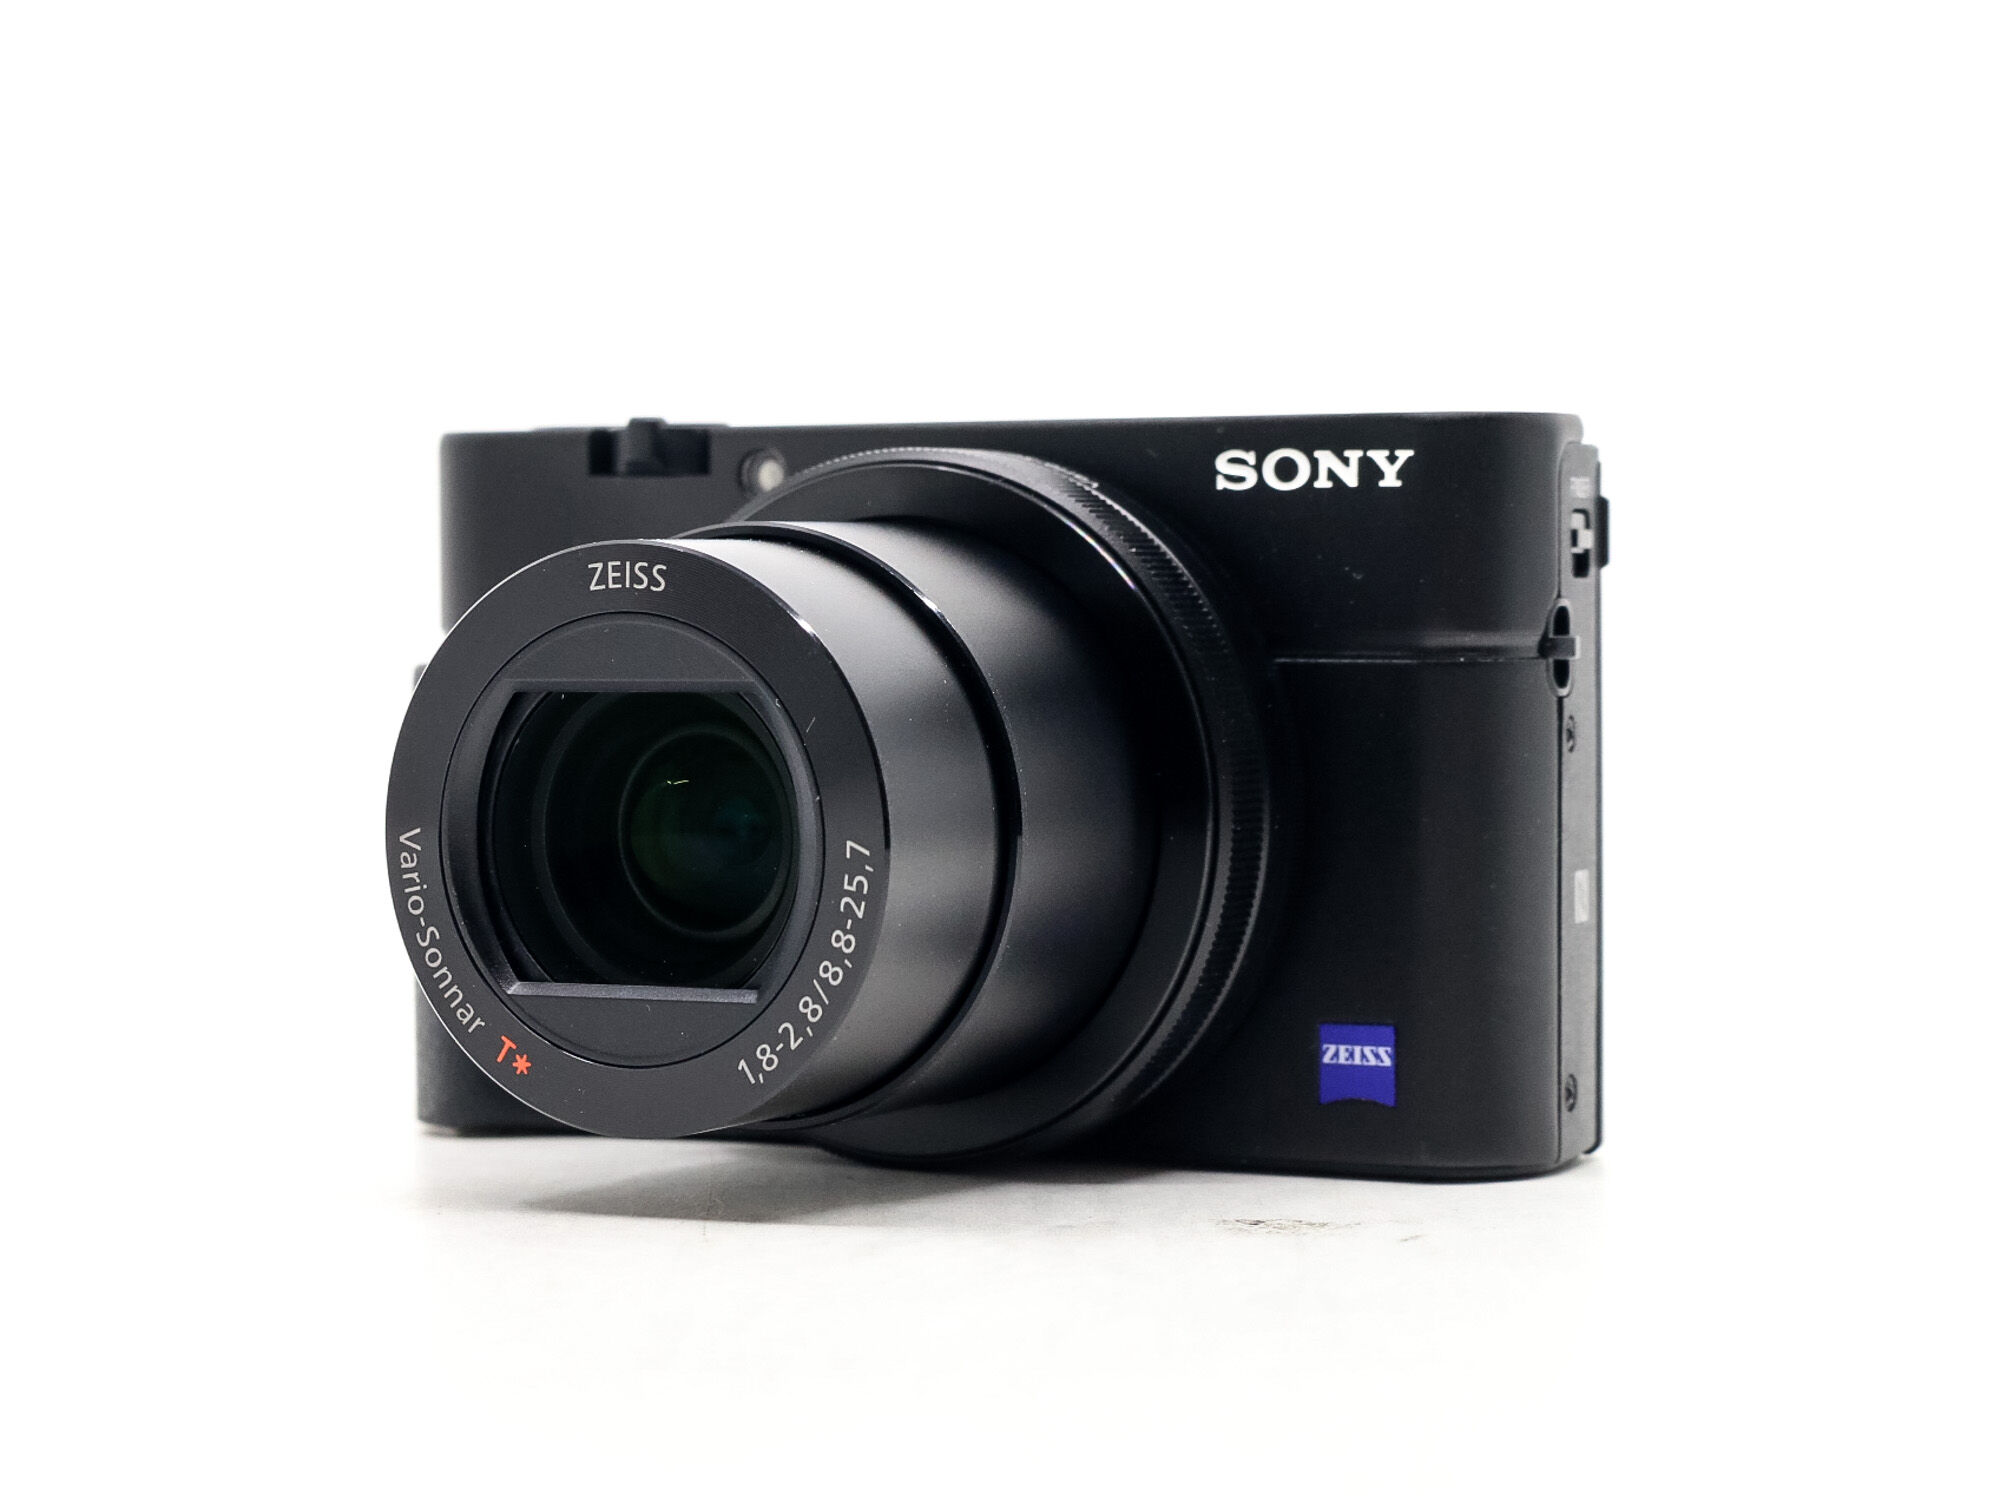 Sony Cyber-shot RX100 Mark III (Condition: Like New)